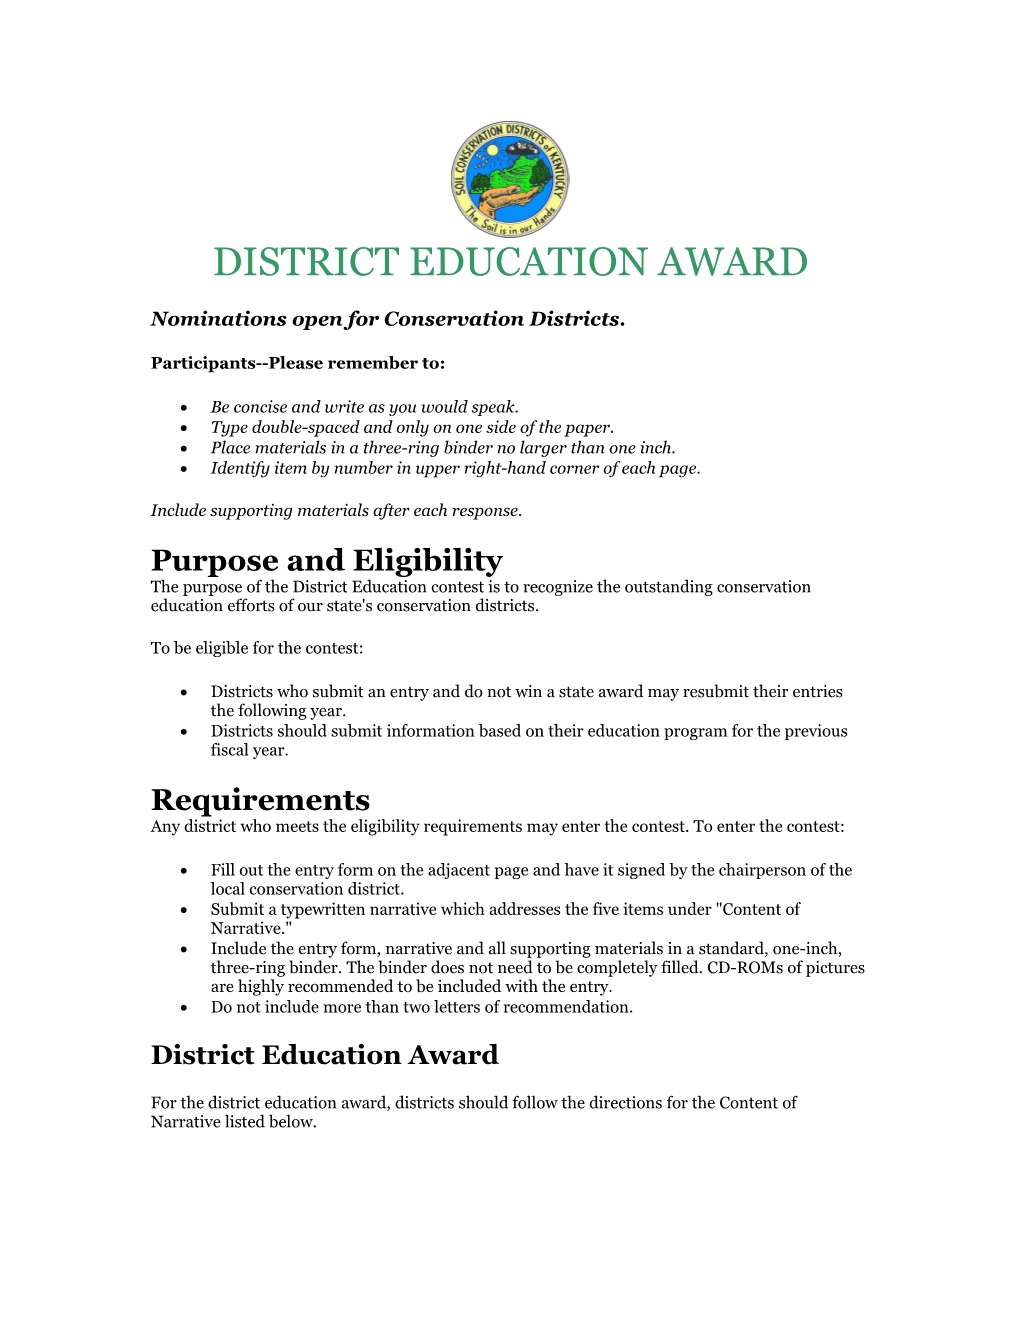 Nominations Openfor Conservation Districts